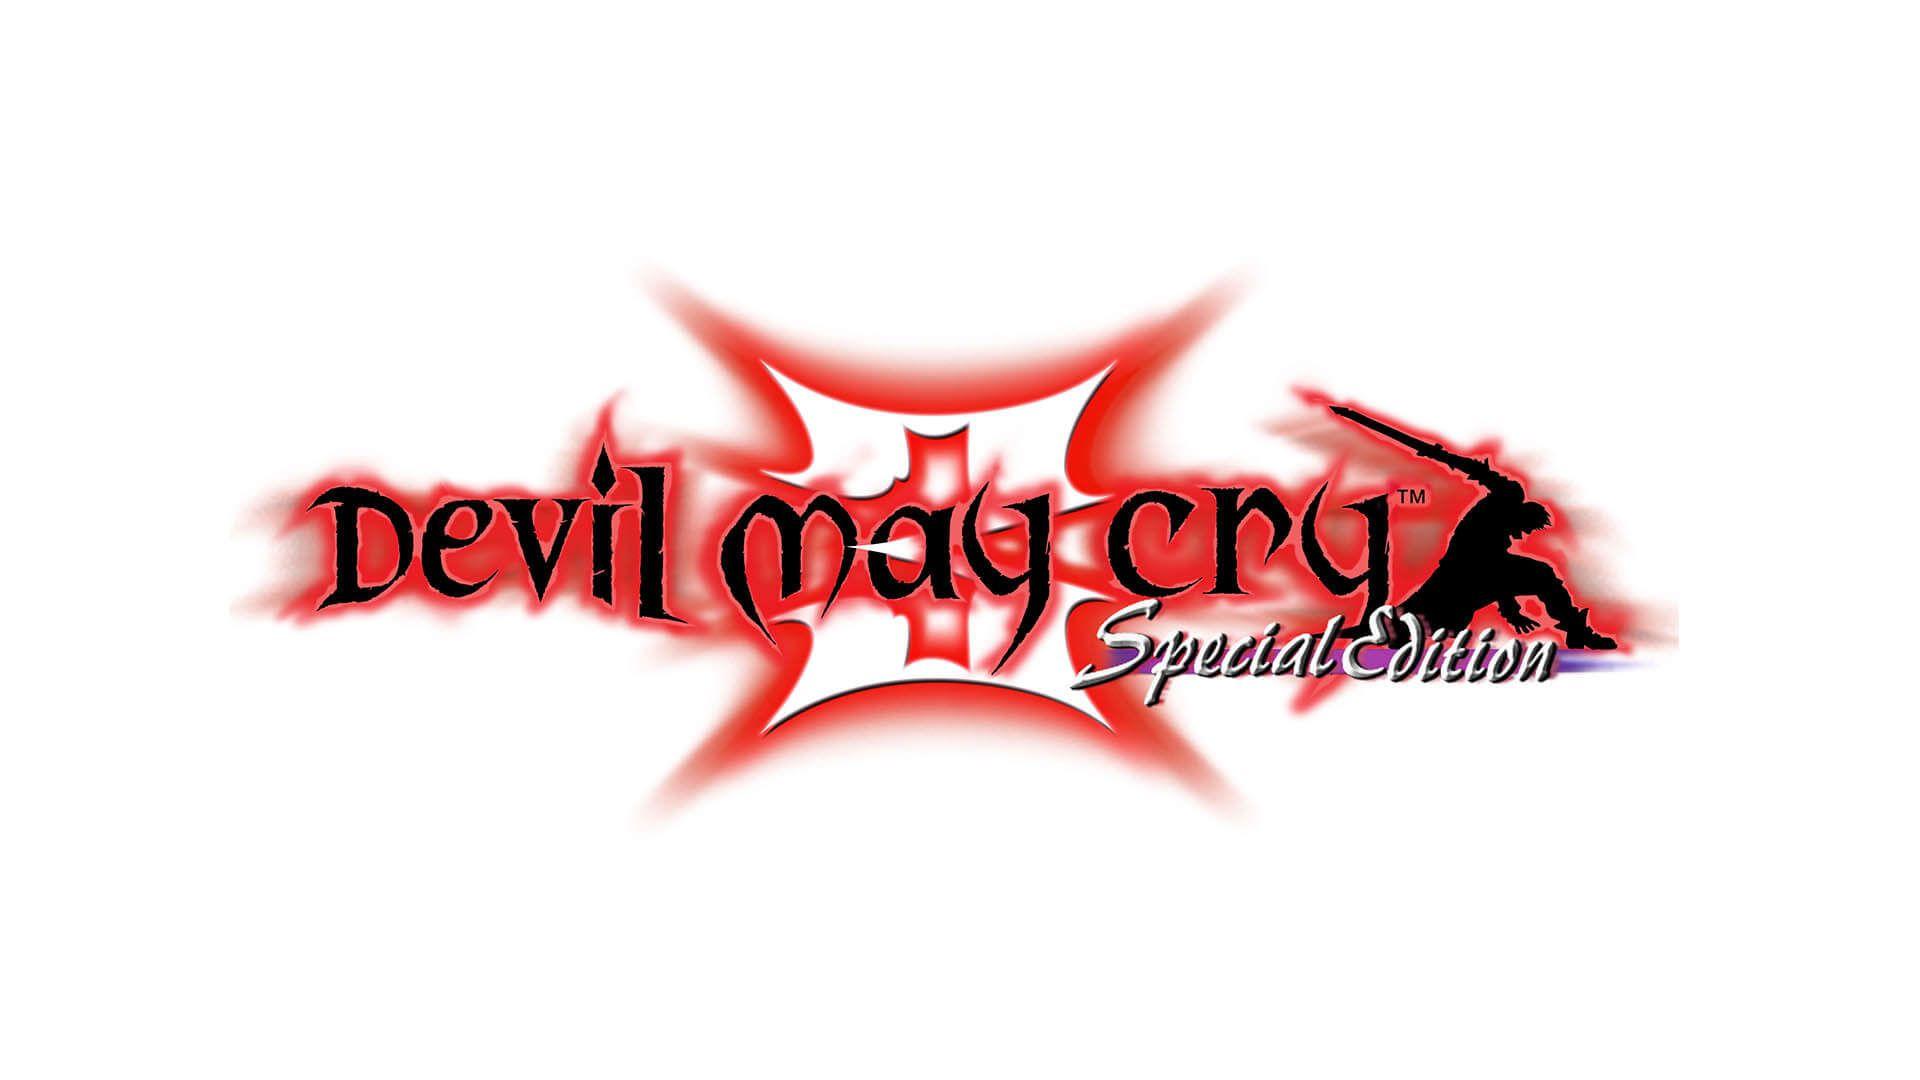 1195025ddb9aa0923625.52844222 Devil May Cry 3 Special Edition Logo Tm